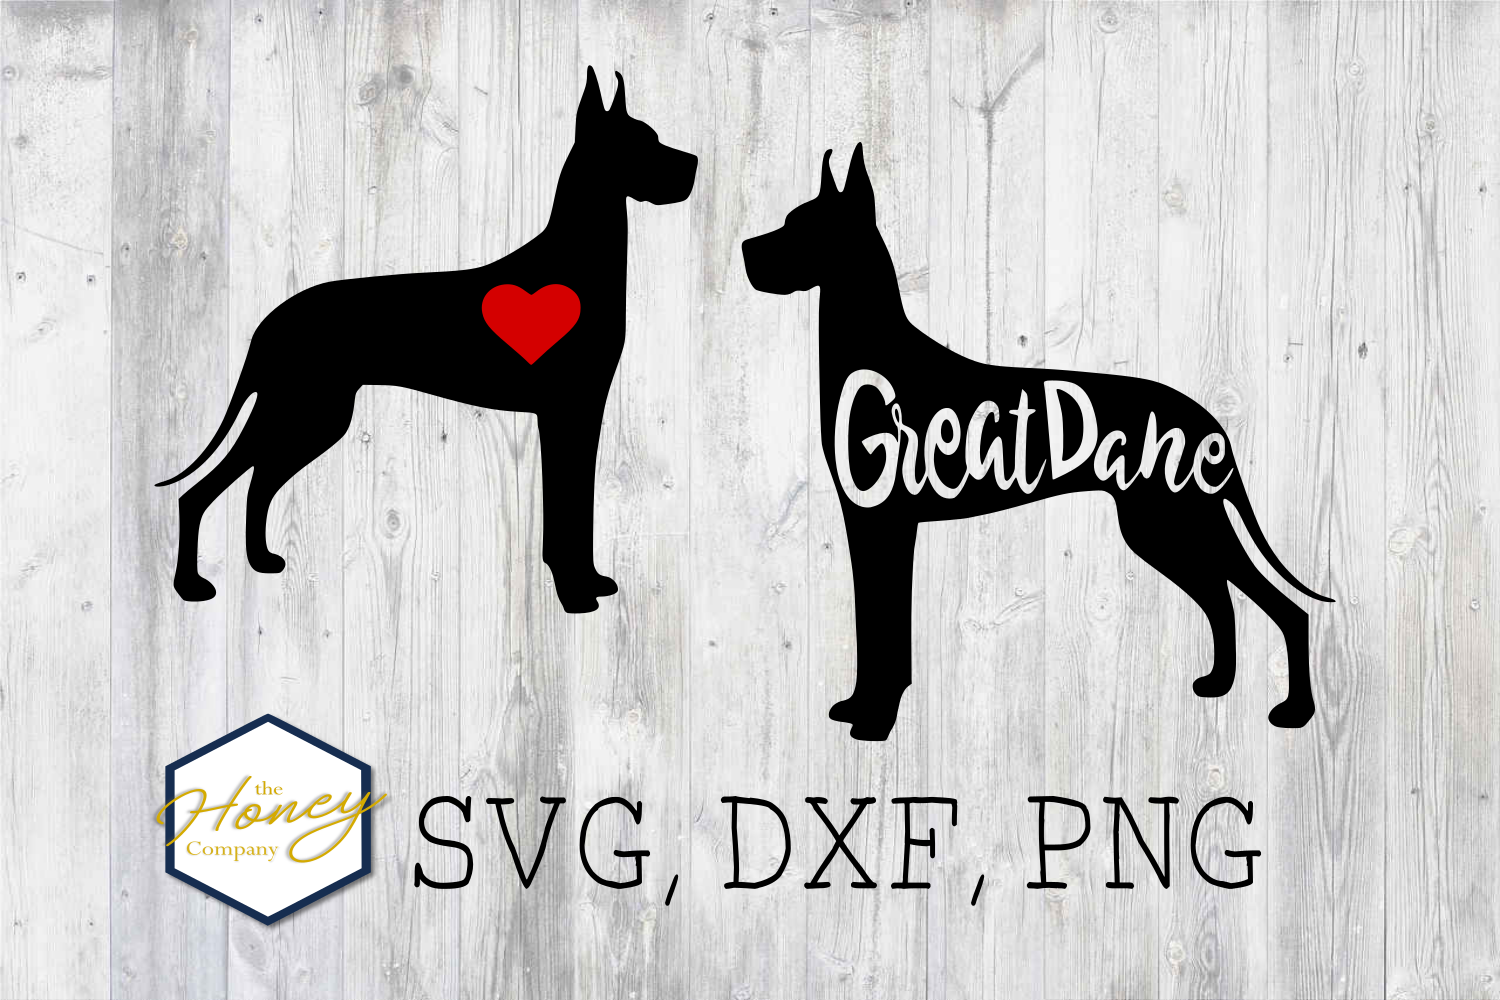 Great Dane SVG PNG DXF Dog Breed Lover Cut File Clipart (277638) | Cut